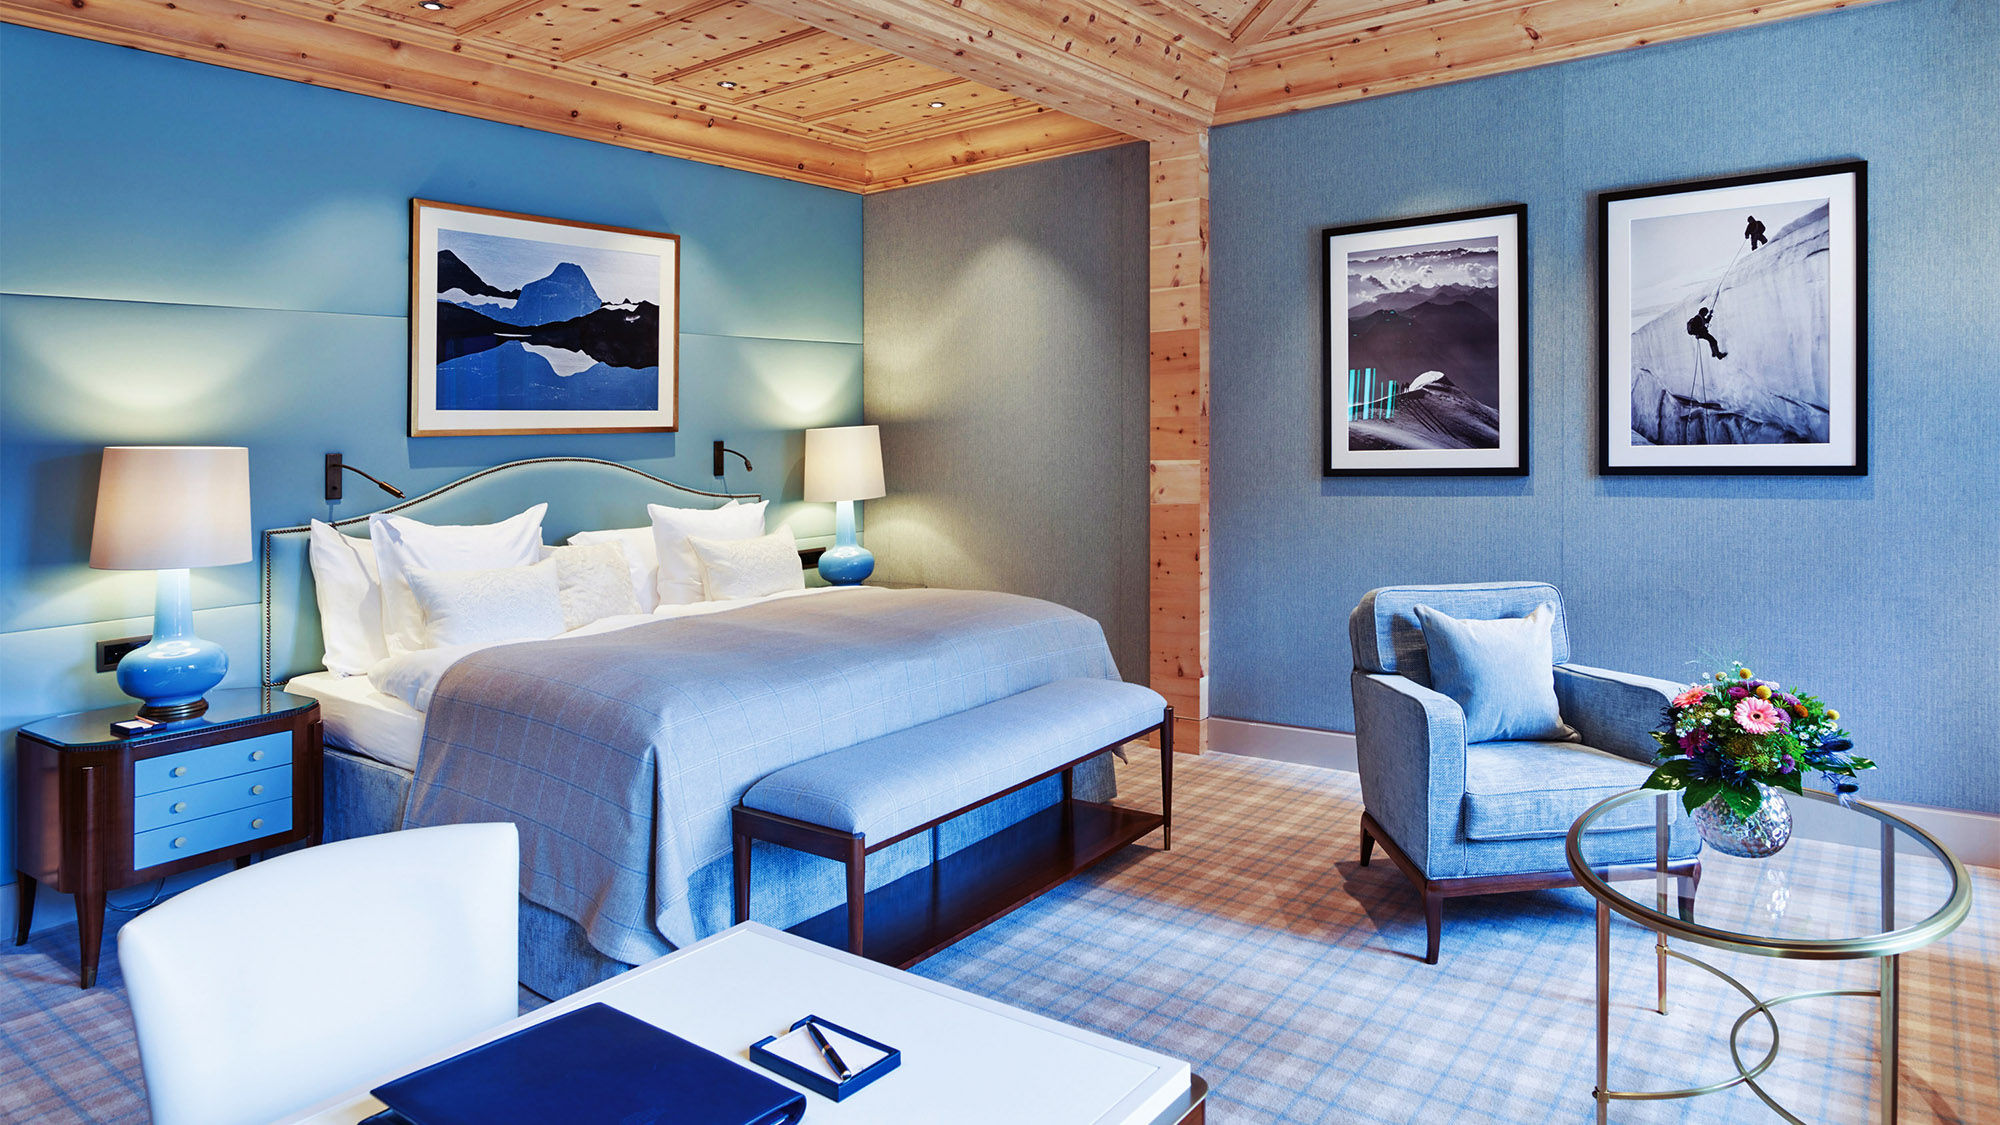 A Junior Suite at the Kulm Hotel St. Moritz with Swiss stone pine carved ceilings.